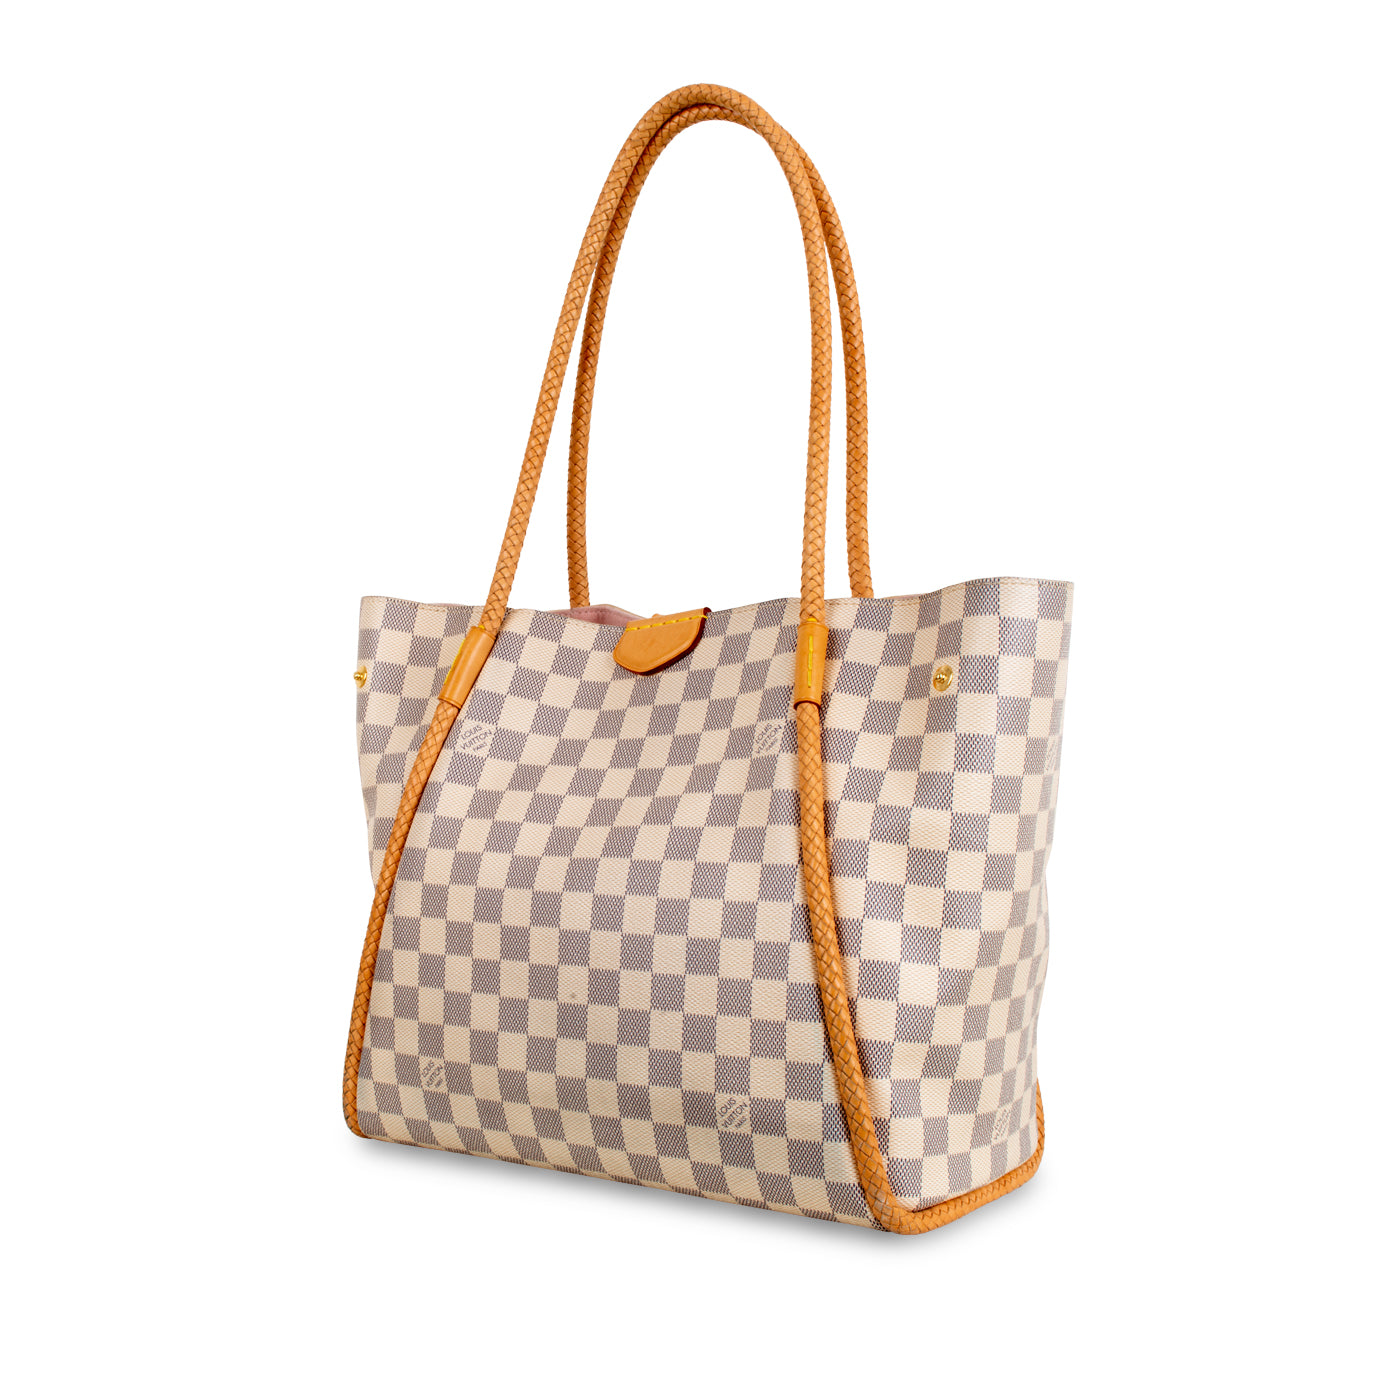 Baggio Consignment - Another look at this classic beauty. Louis Vuitton  Propriano Damier Azur Canvas Shoulder Tote Bag, available now for $1700.  Click the photo to shop or check out our other